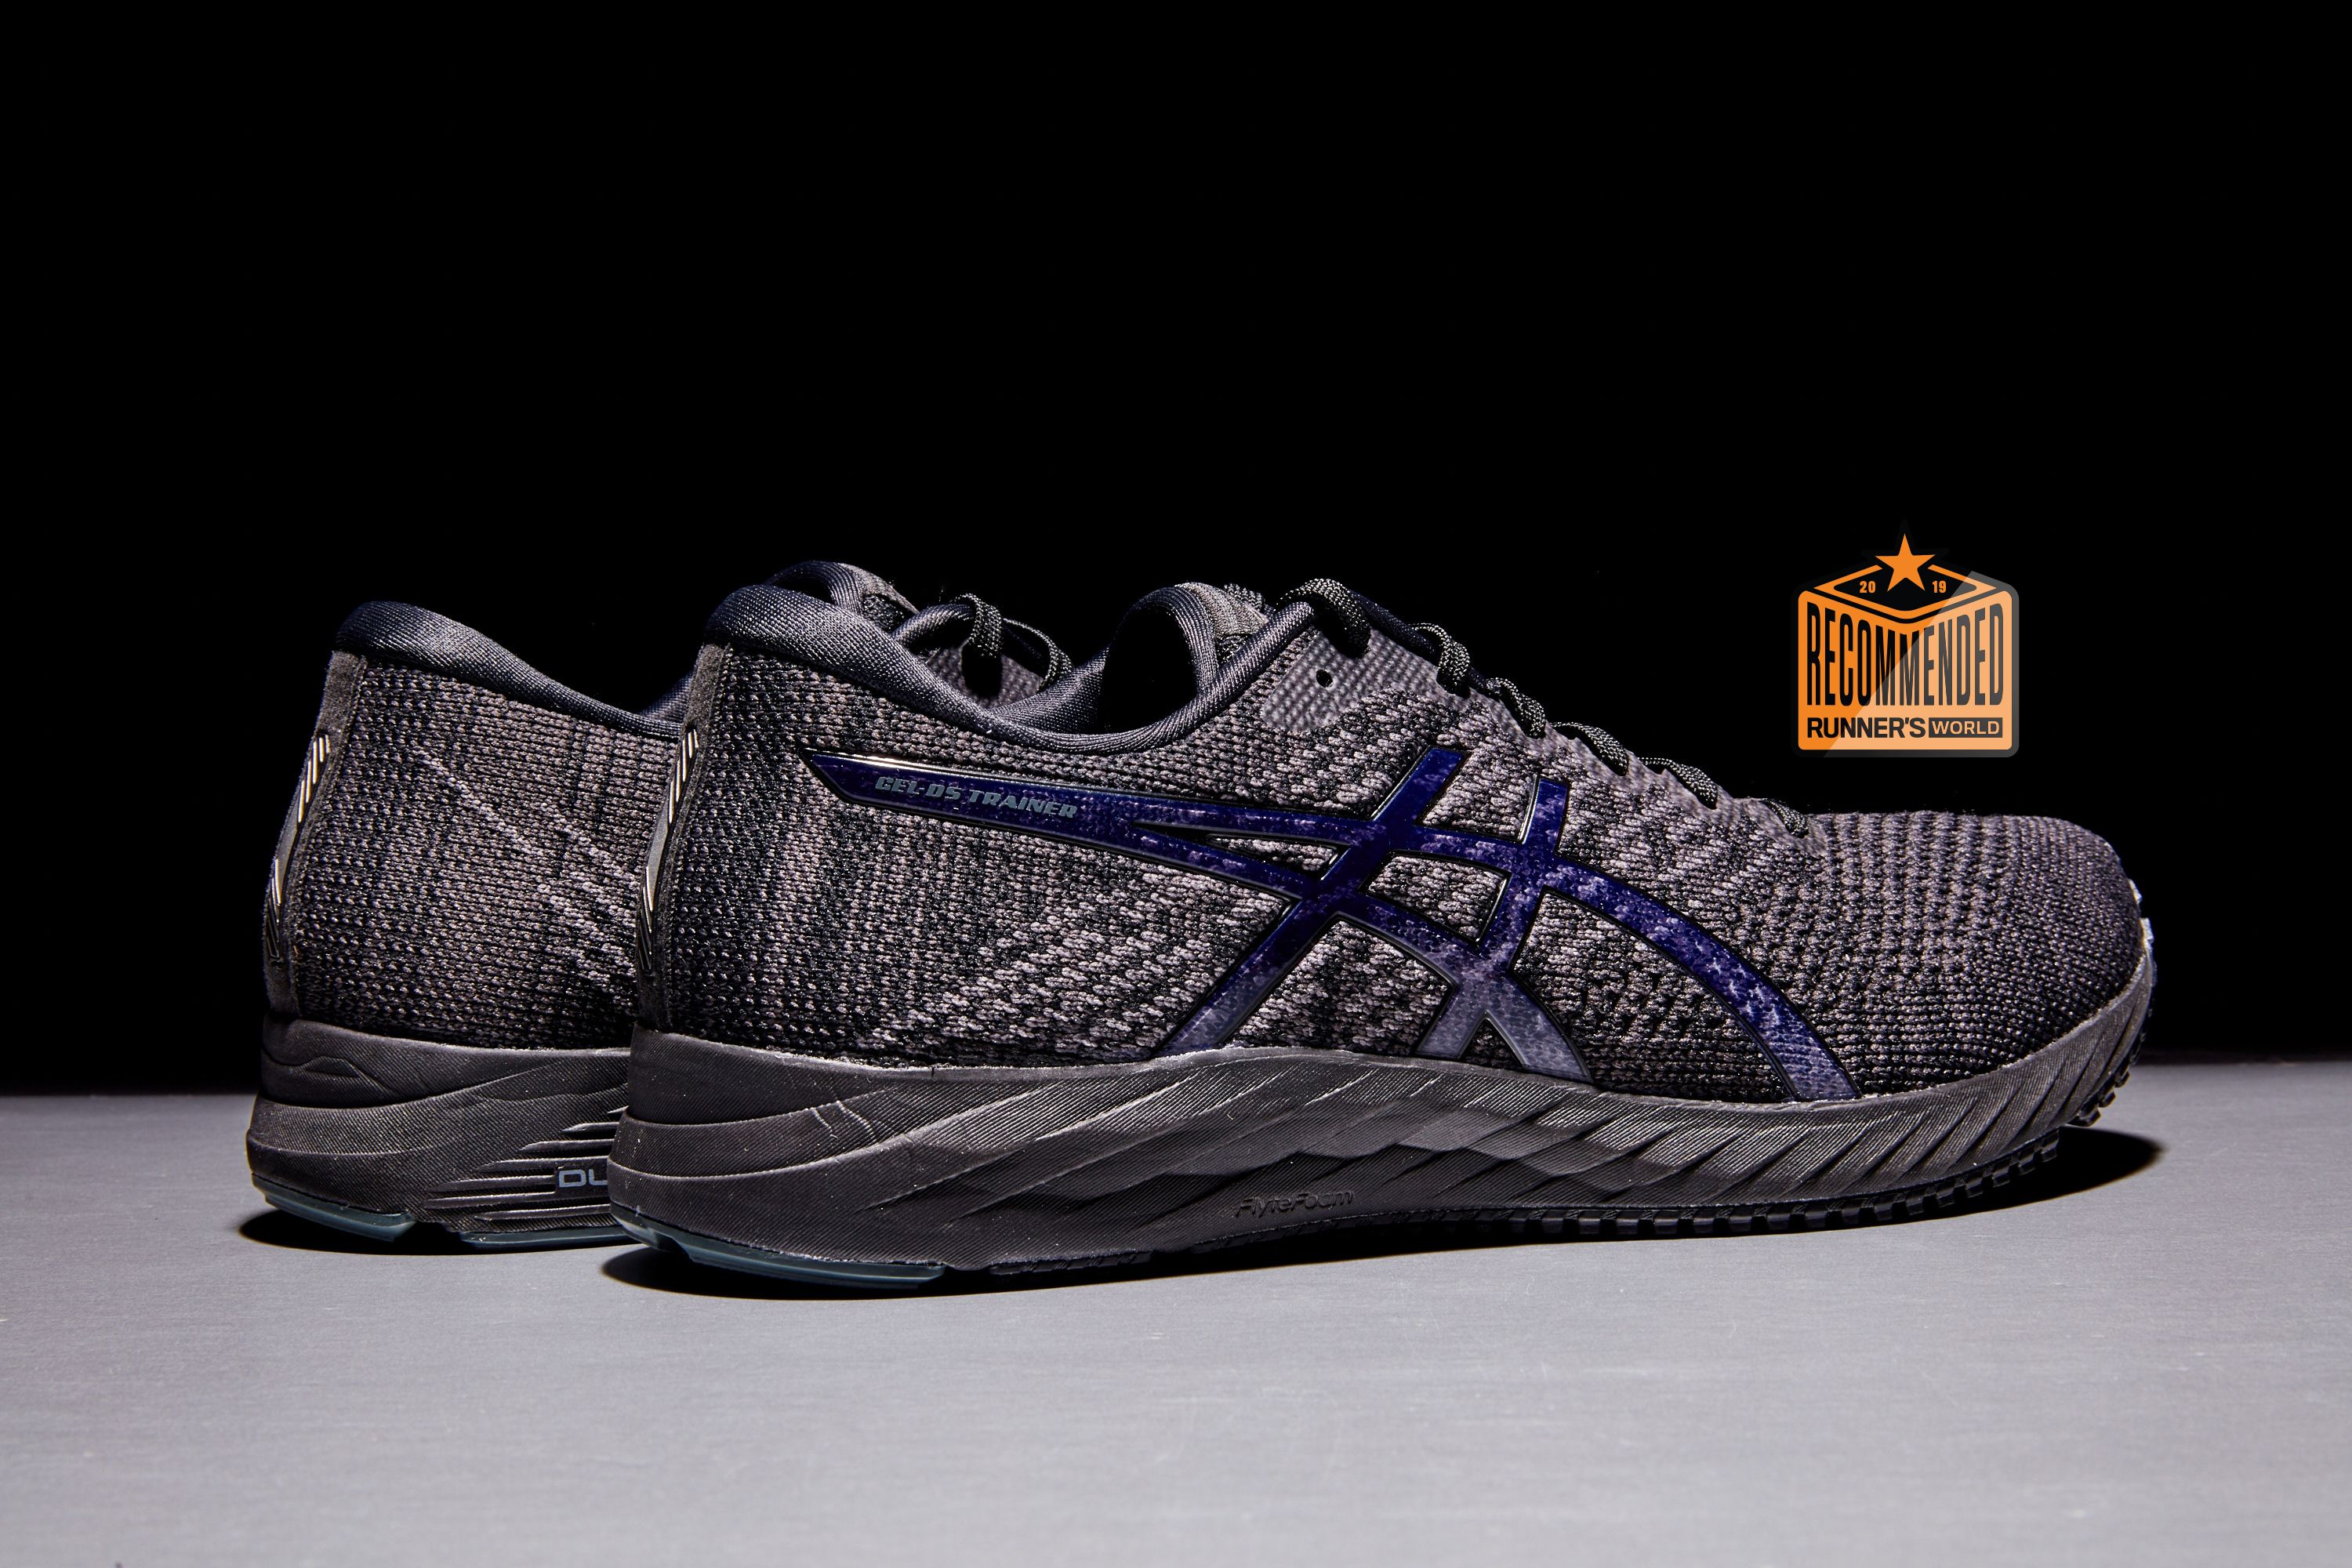 Deformation rear In most cases Asics Gel-DS Trainer 24 Review - Asics Road Shoe Review